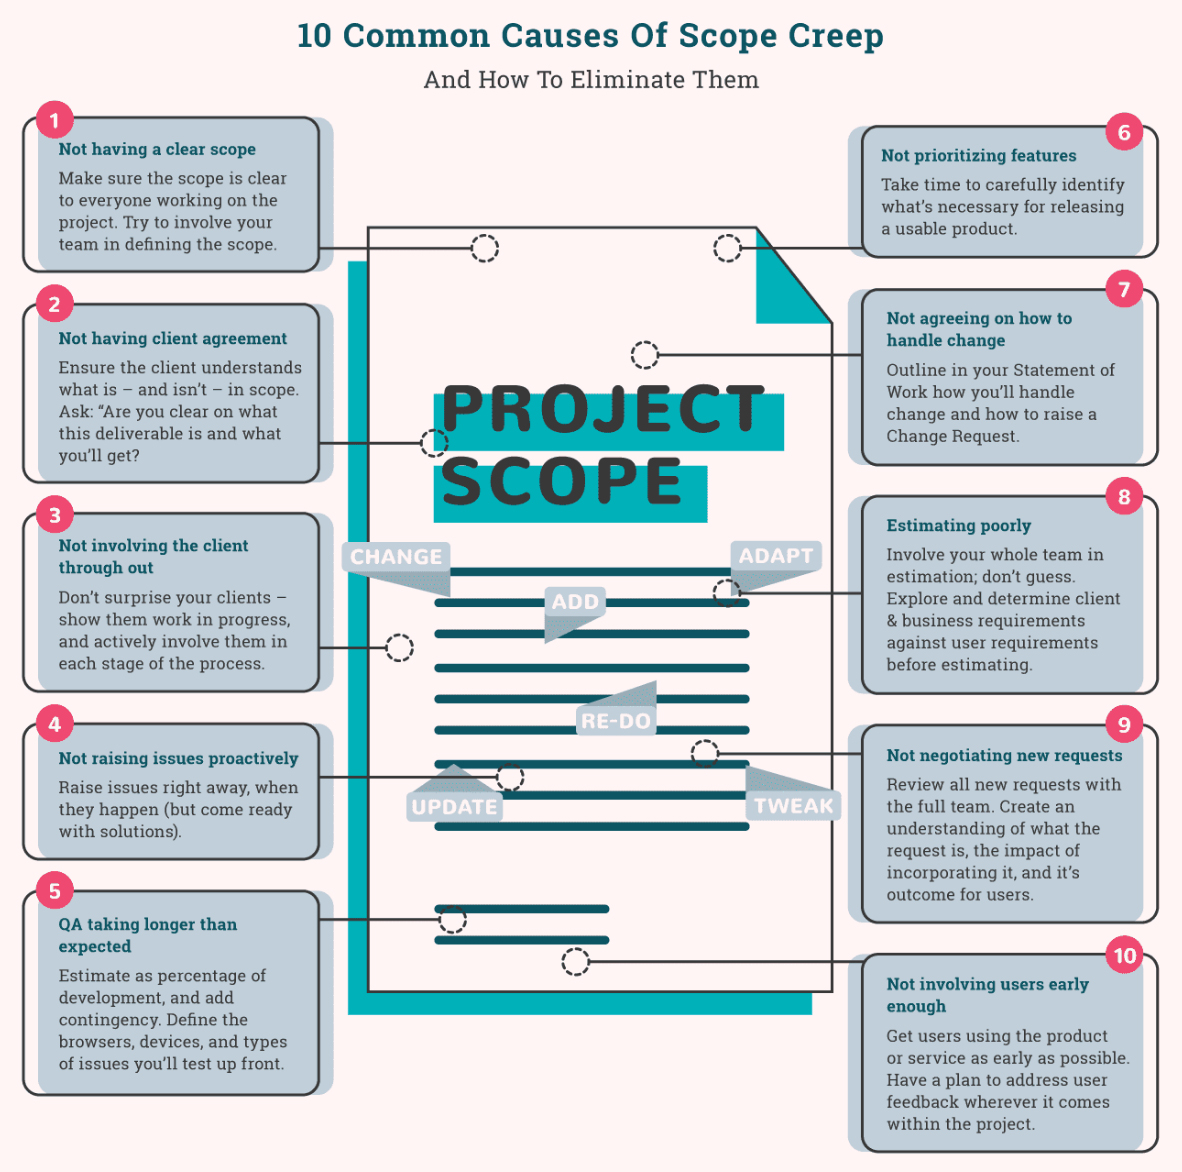 10 common causes of scope creep include not having clear scope, not having client agreement, not involving client, not raising issues proactively, QA taking longer than expected, not prioritizing features, not agreeing on how to handle change, estimating poorly, not negotiating new requests, and not involving users early enough.